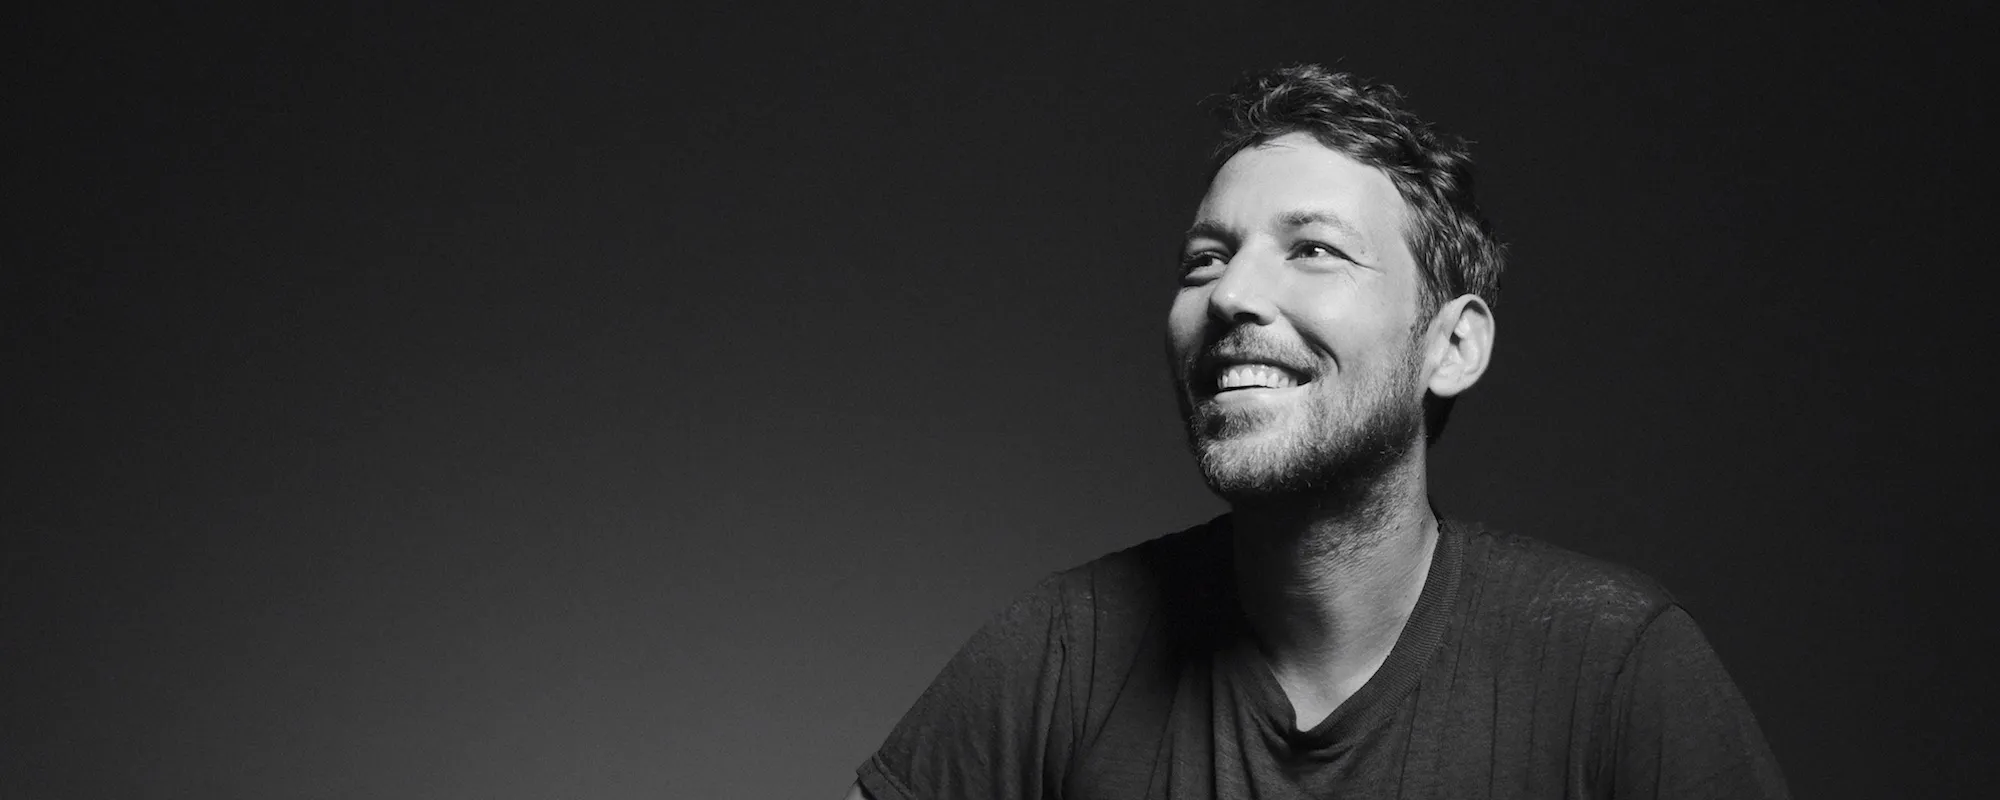 Fleet Foxes Set to Release ‘A Very Lonely Solstice,’ Singer Robin Pecknold to Teach Four-Week Songwriting Class